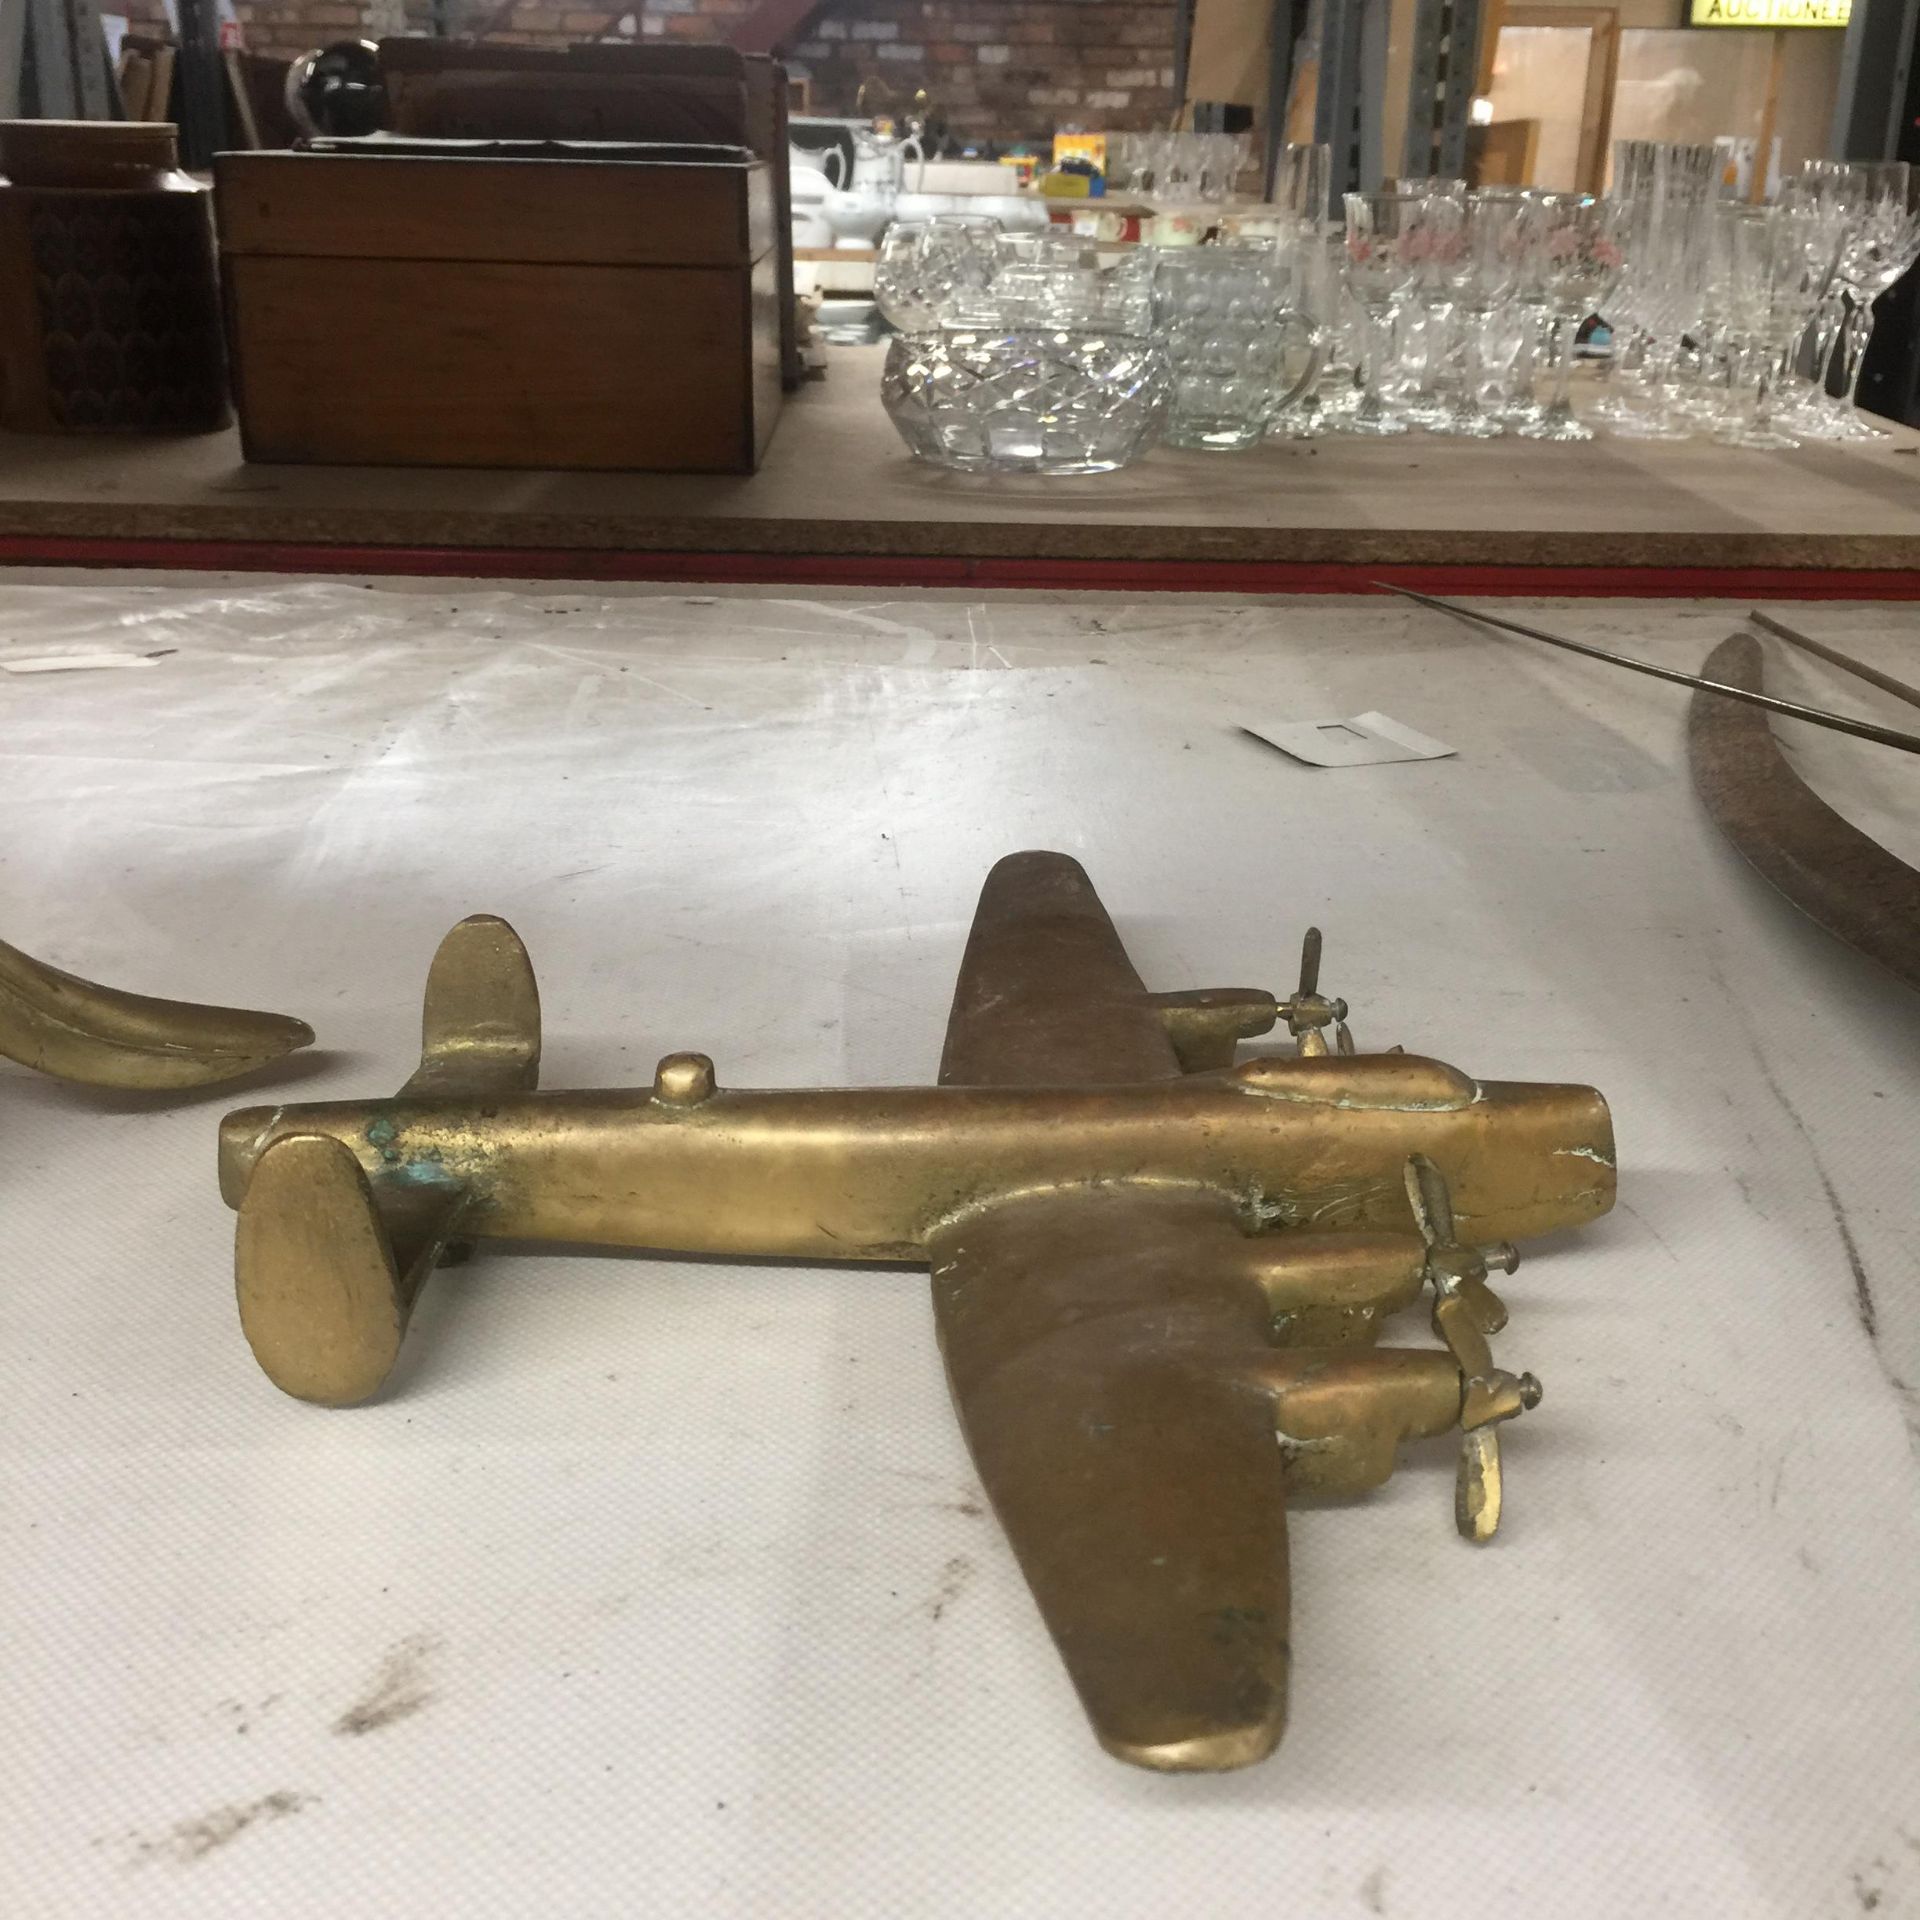 A HEAVY, SOLID BRASS AVRO LANCASTER BOMBER, LENGTH 25 CM - Image 2 of 3